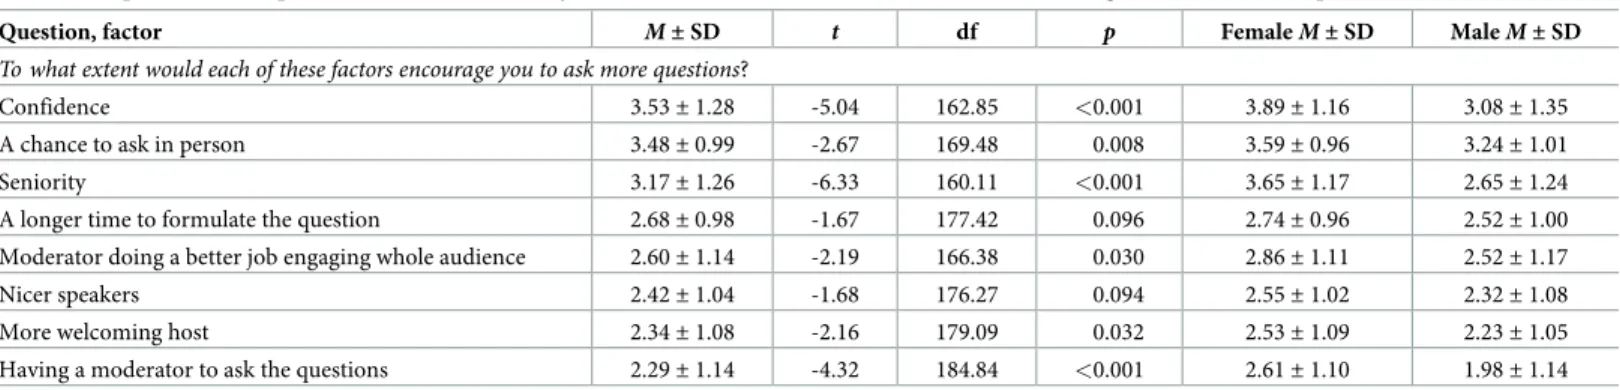 Table 3. Responses of a sample of academics who identify as male and female about what factors would encourage them to ask more questions after a seminar.